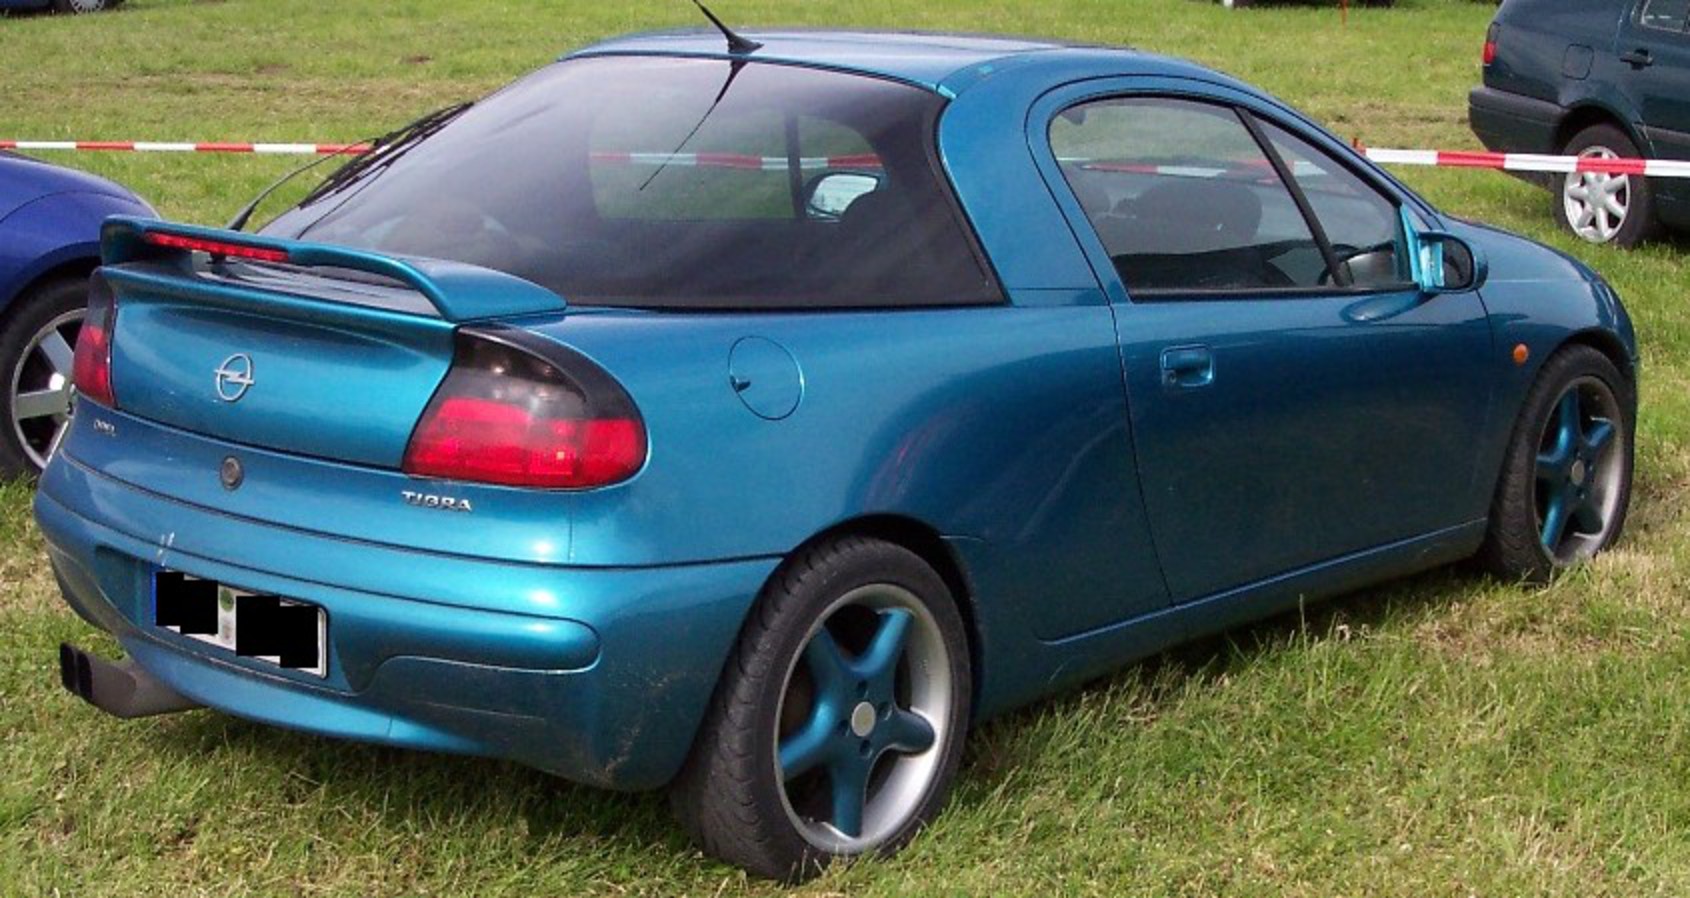 Model Opel Tigra is begining 1994 in Germany. The end of make is 2000.